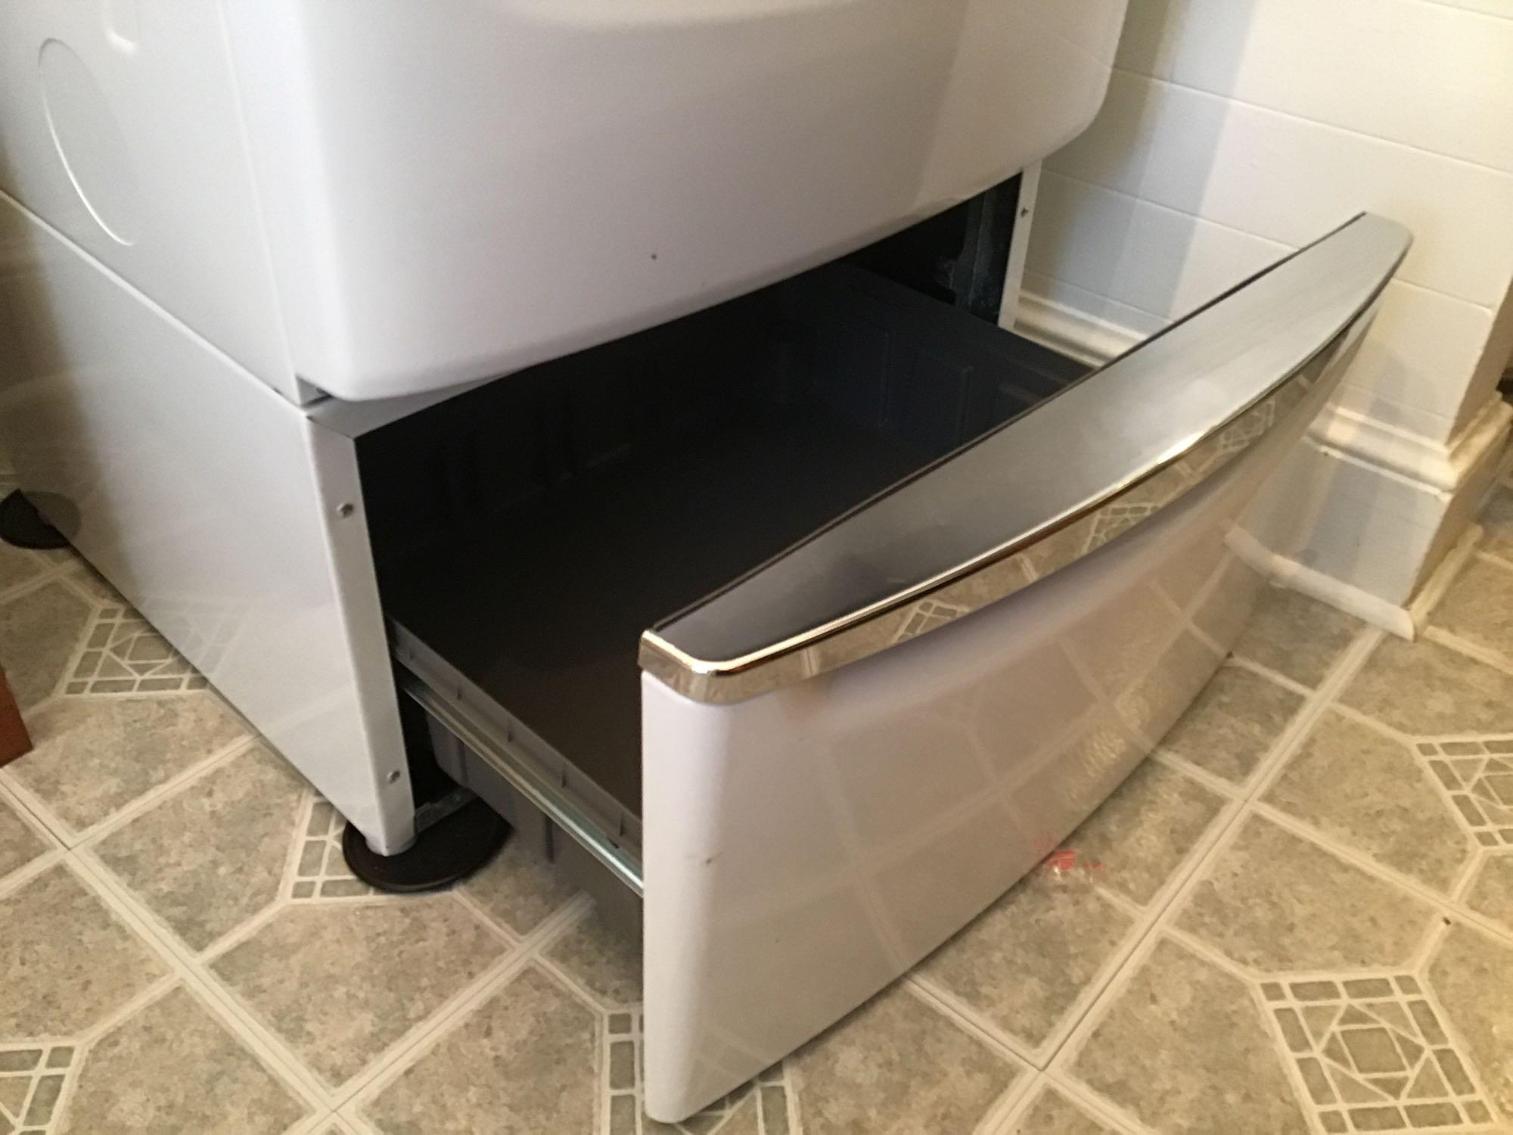 Image for Maytag Dryer - Matches Washer